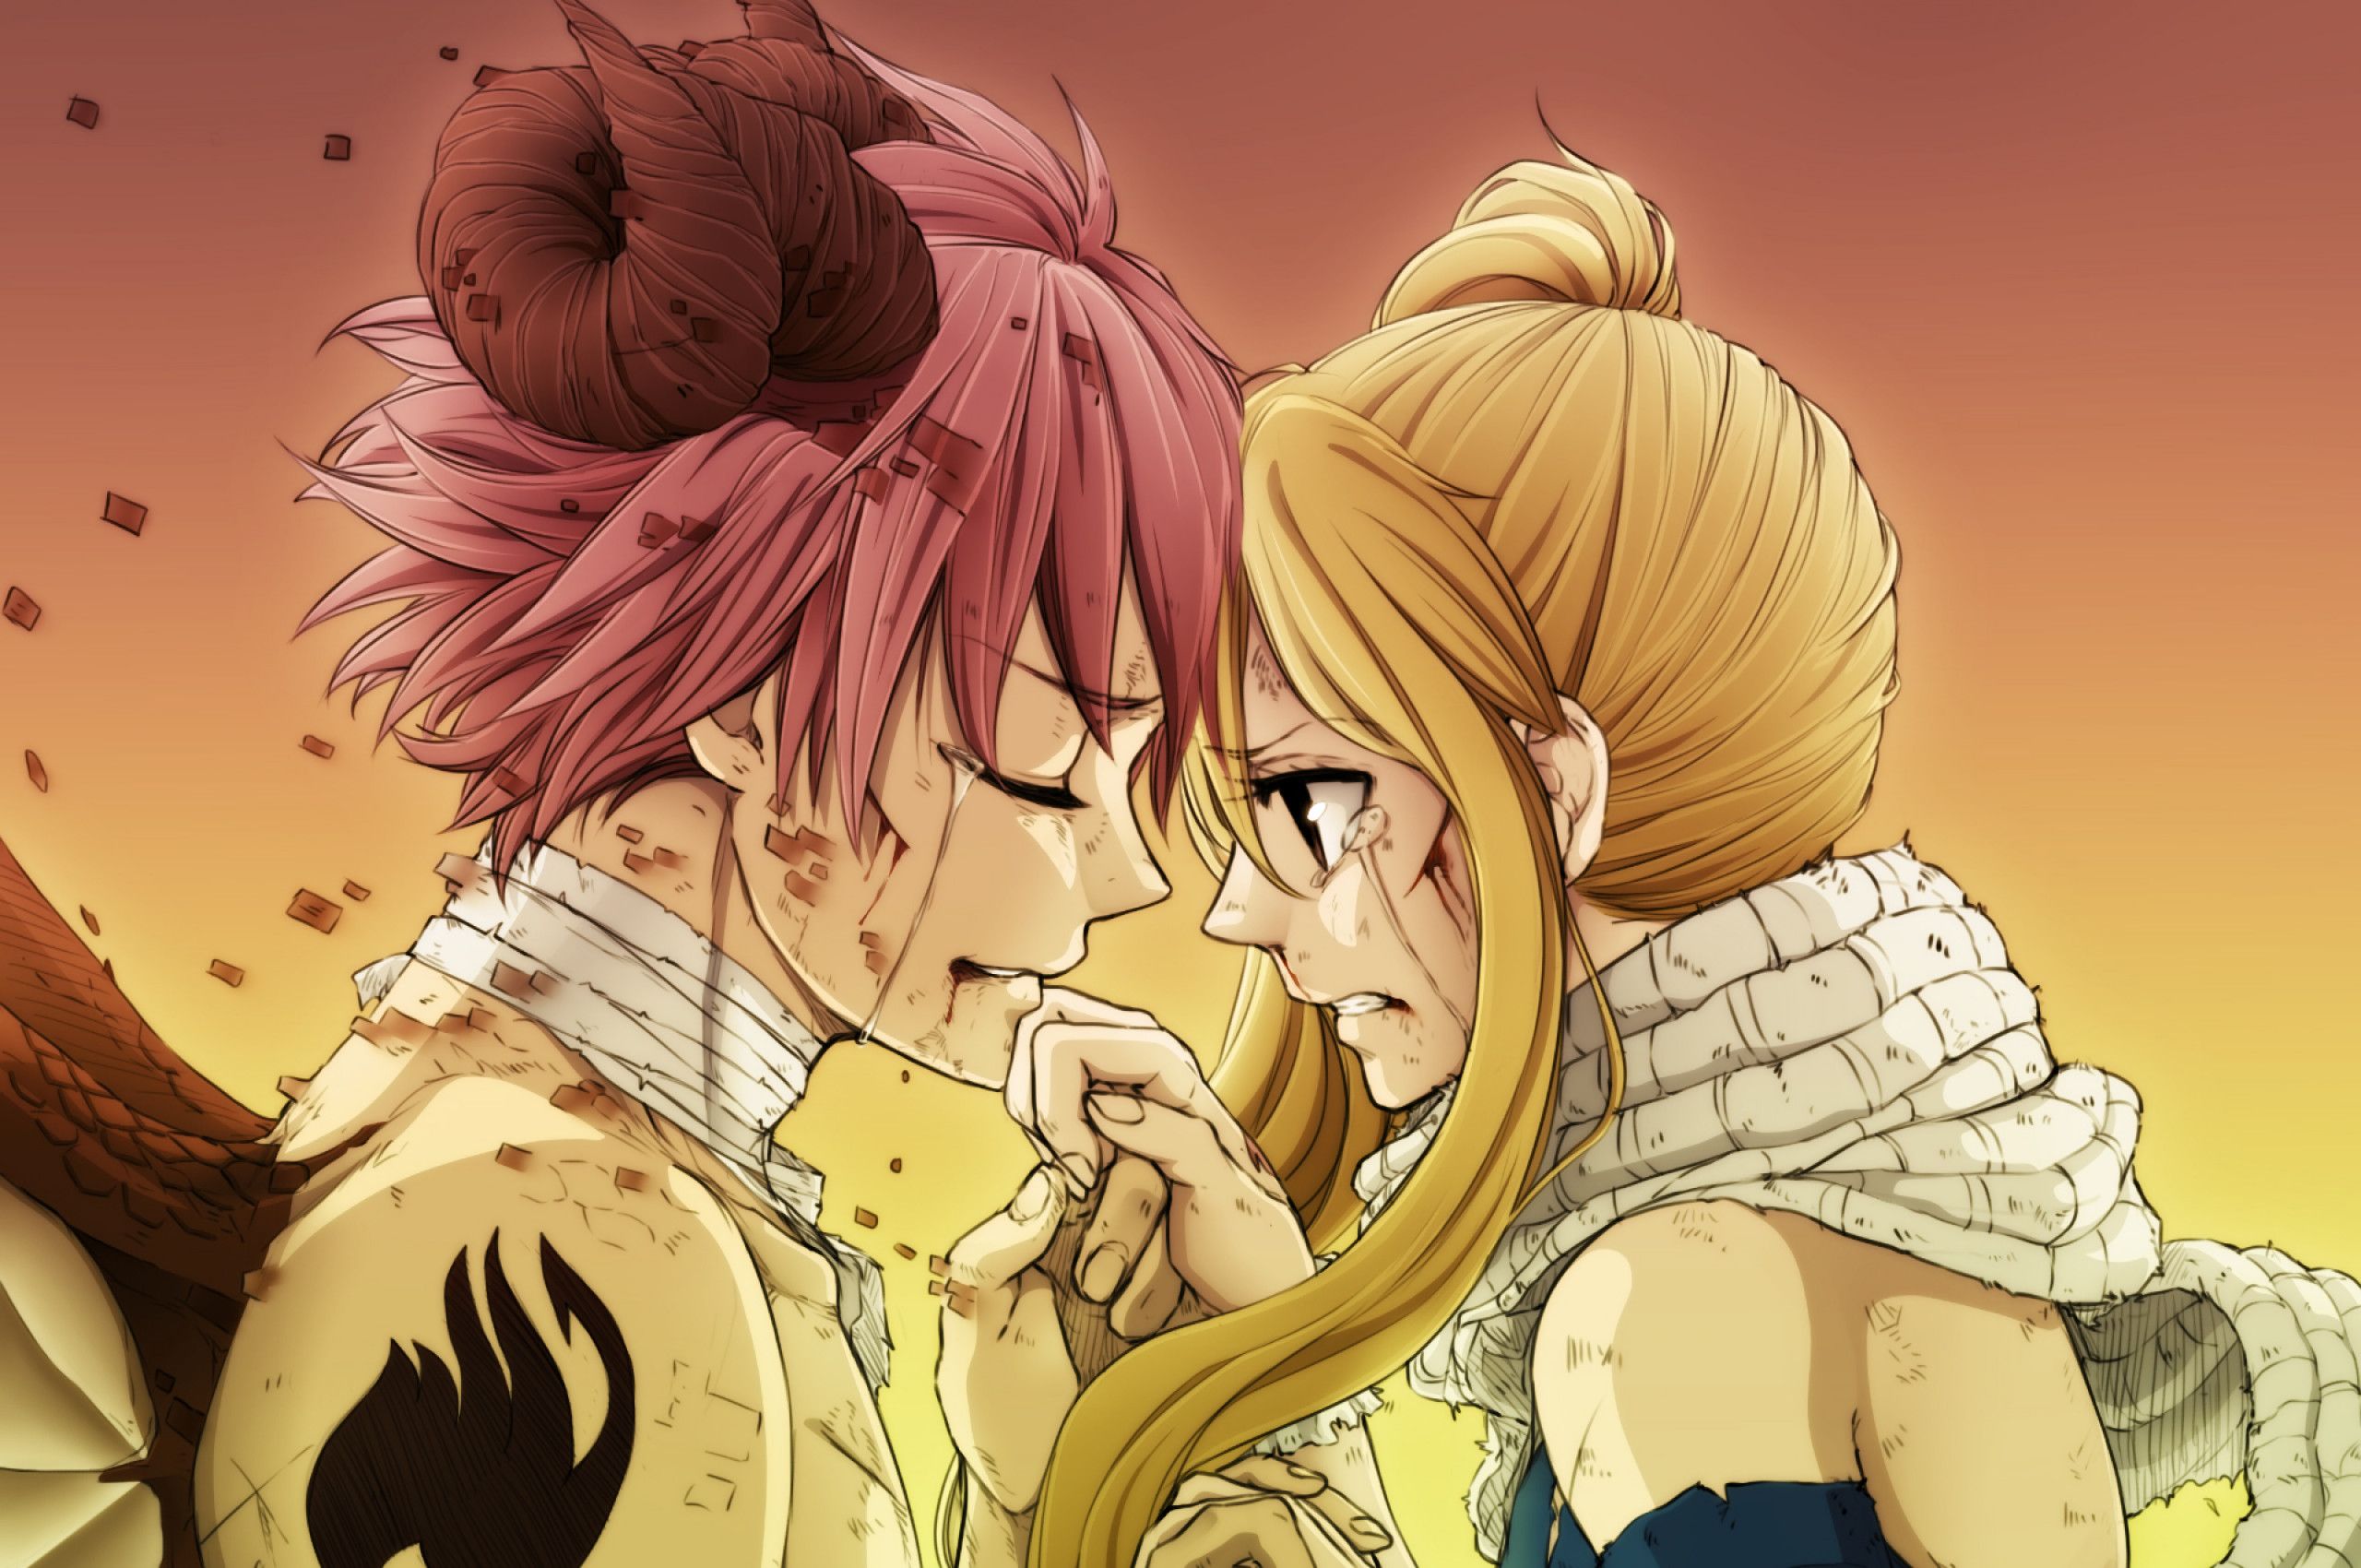 Anime Natsu X Lucy Love Wallpapers - Wallpaper Cave.